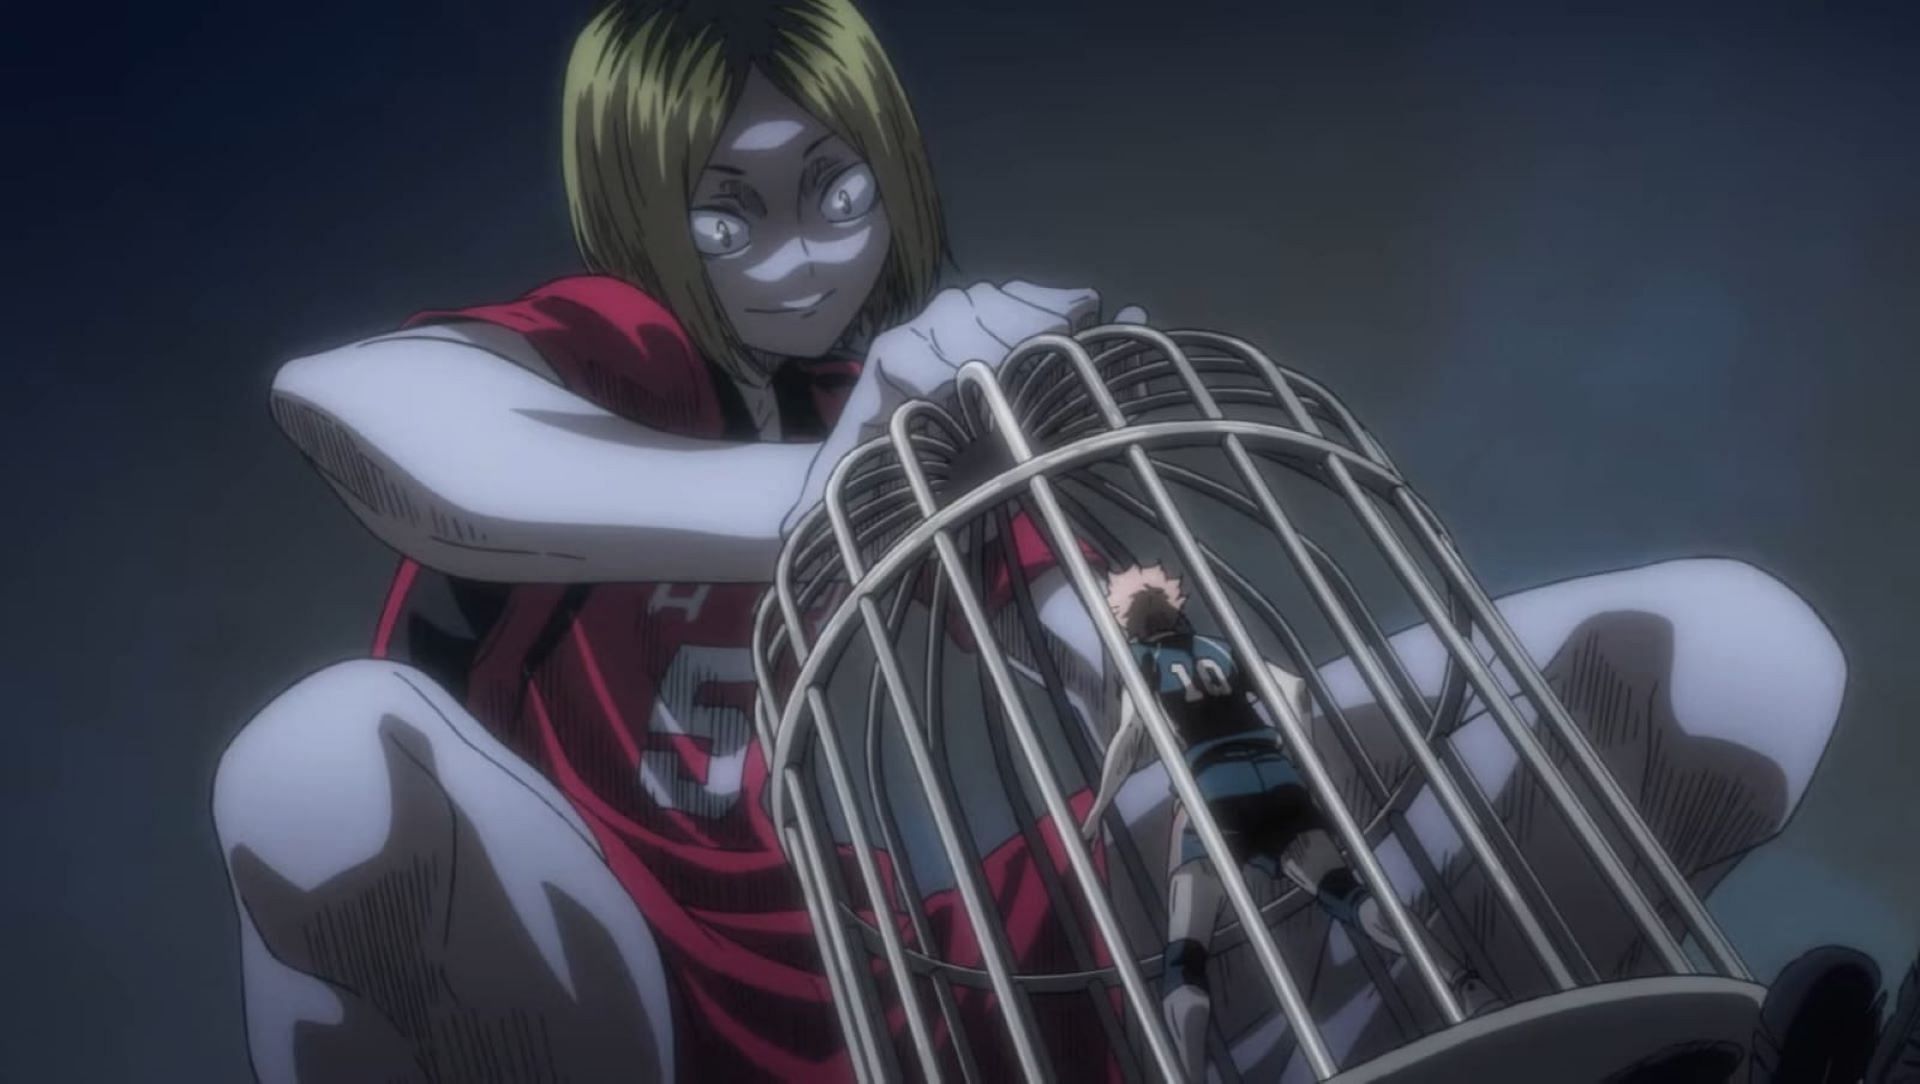 Kenma and Shoyo, as seen in the trailer (Image via Production I.G)